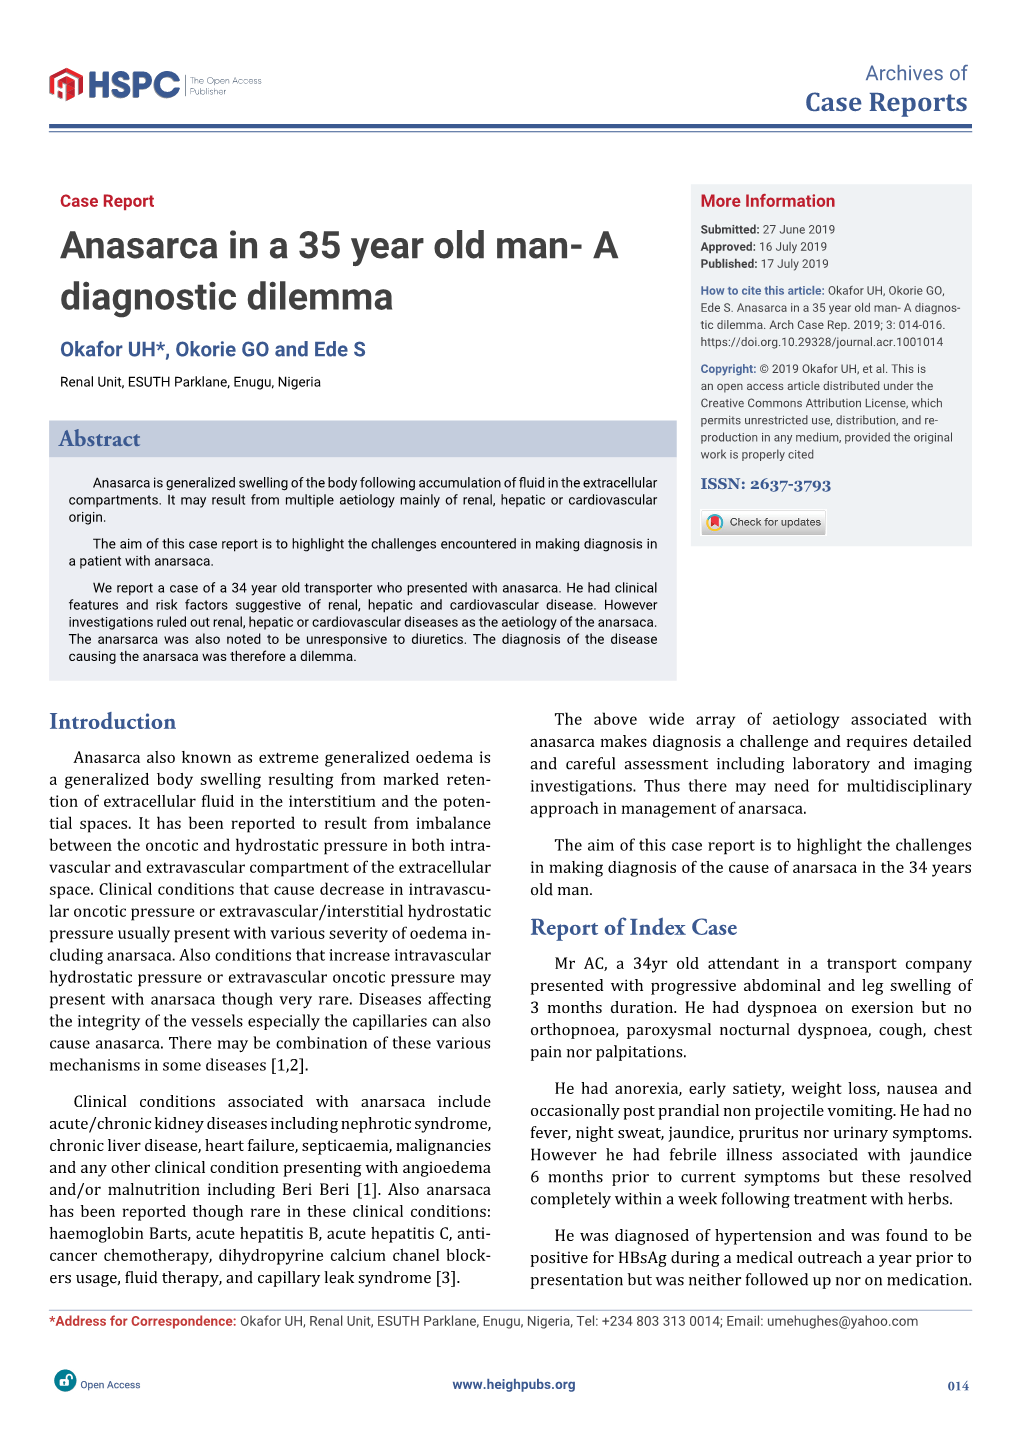 Anasarca in a 35 Year Old Man- a Diagnostic Dilemma